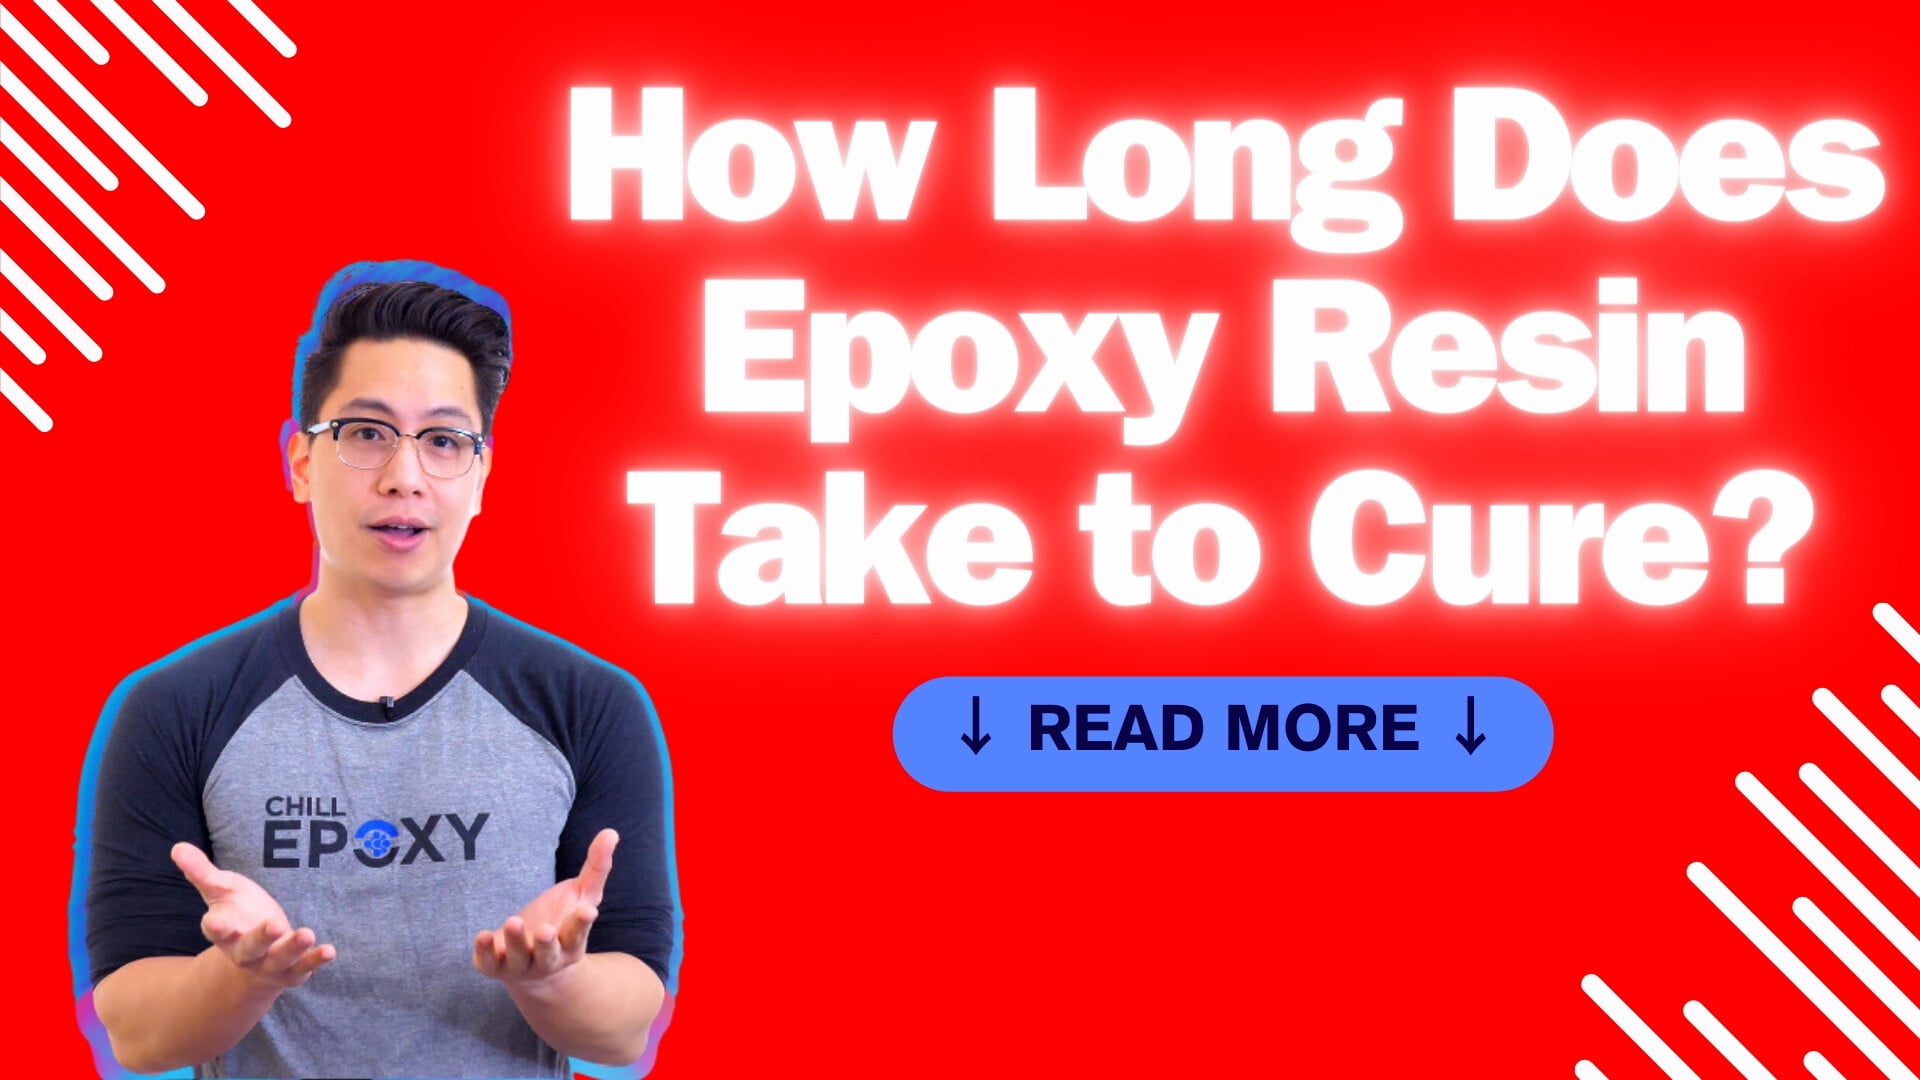 How Long Does Epoxy Resin Take to Cure?